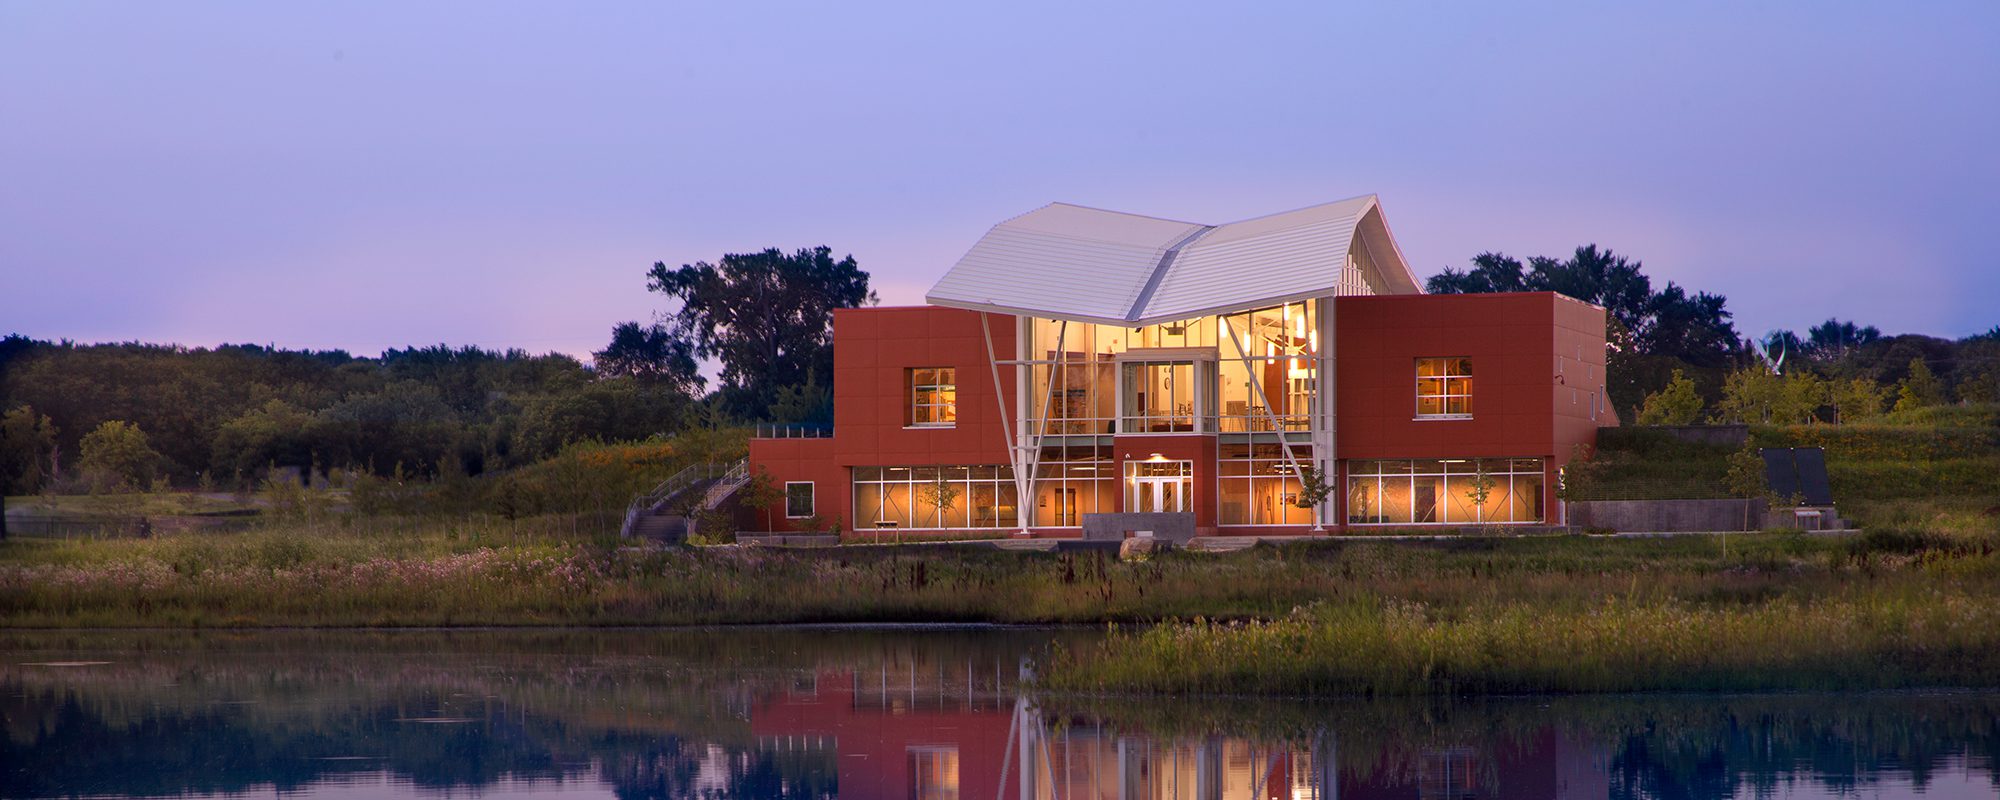 A community center done in contemporary design, with a curved roof and glass front, at dusk